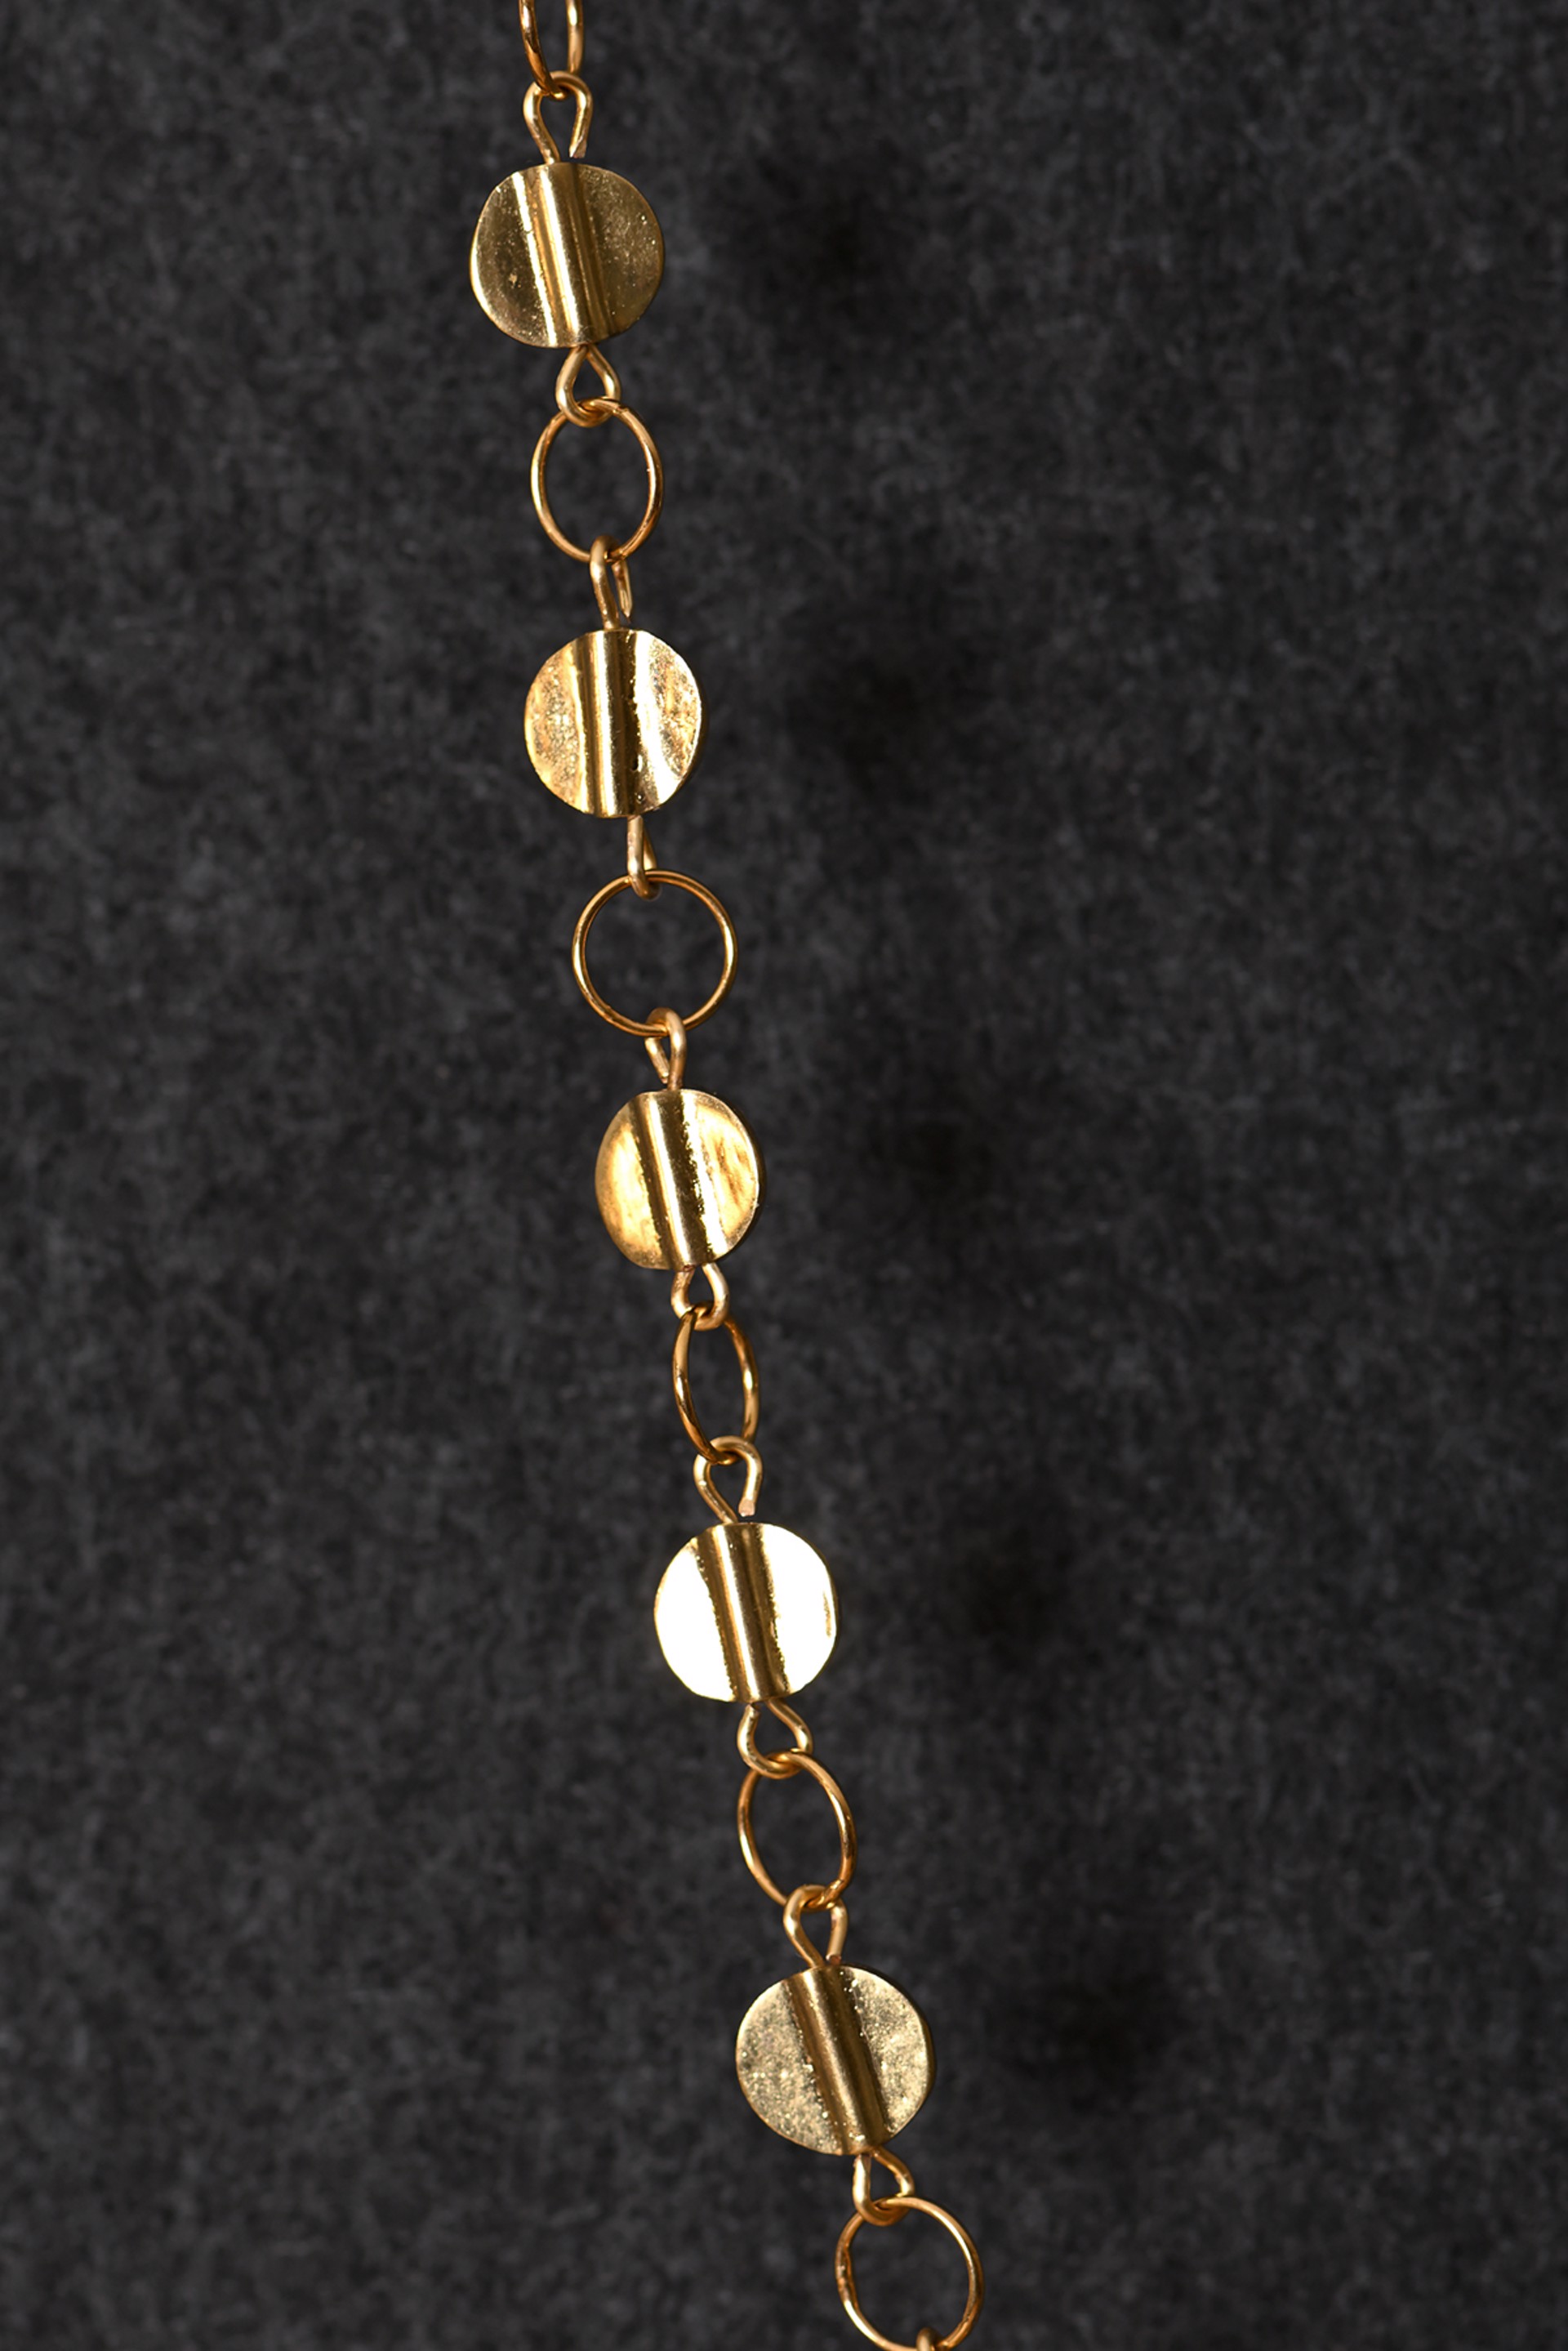 Brass Quaking Aspen Necklace by Cameron Johnson